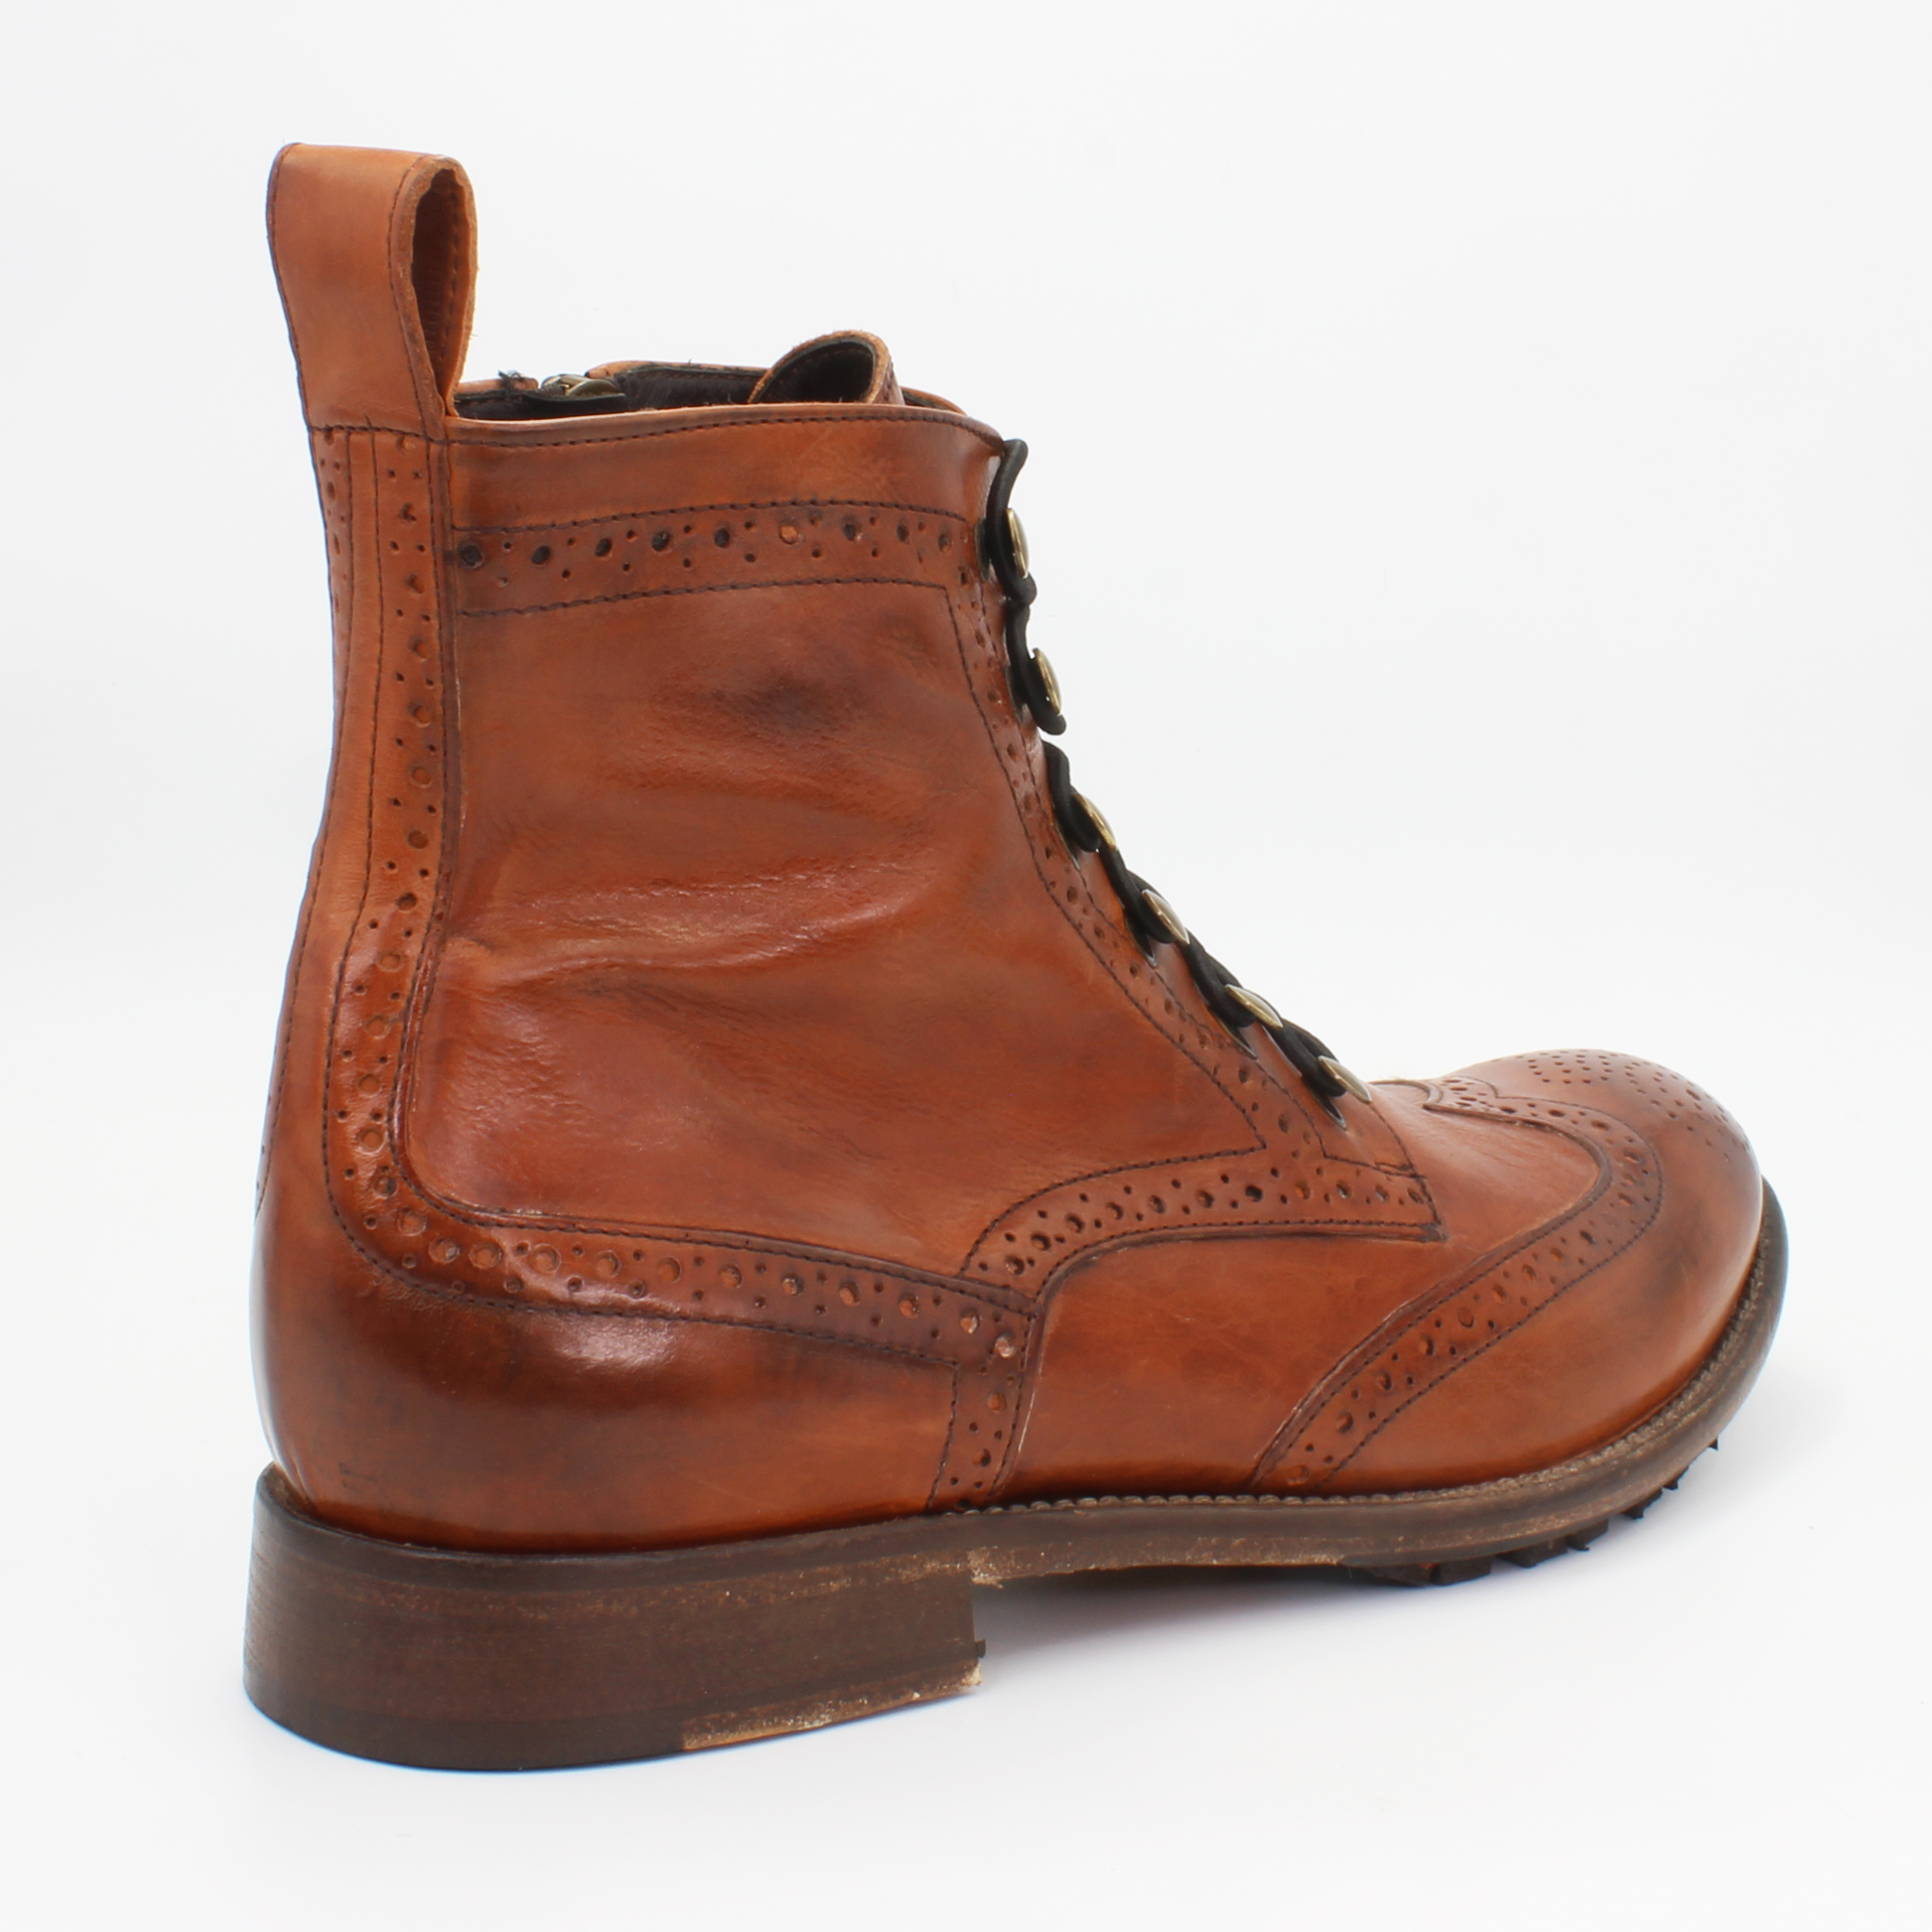 Shop Handmade Italian Leather Brogue Boot in Cuoio Tan (JP38767/11) or browse our range of hand-made Italian boots for men in leather or suede in-store at Aliverti Cape Town, or shop online. We deliver in South Africa & offer multiple payment plans as well as accept multiple safe & secure payment methods.